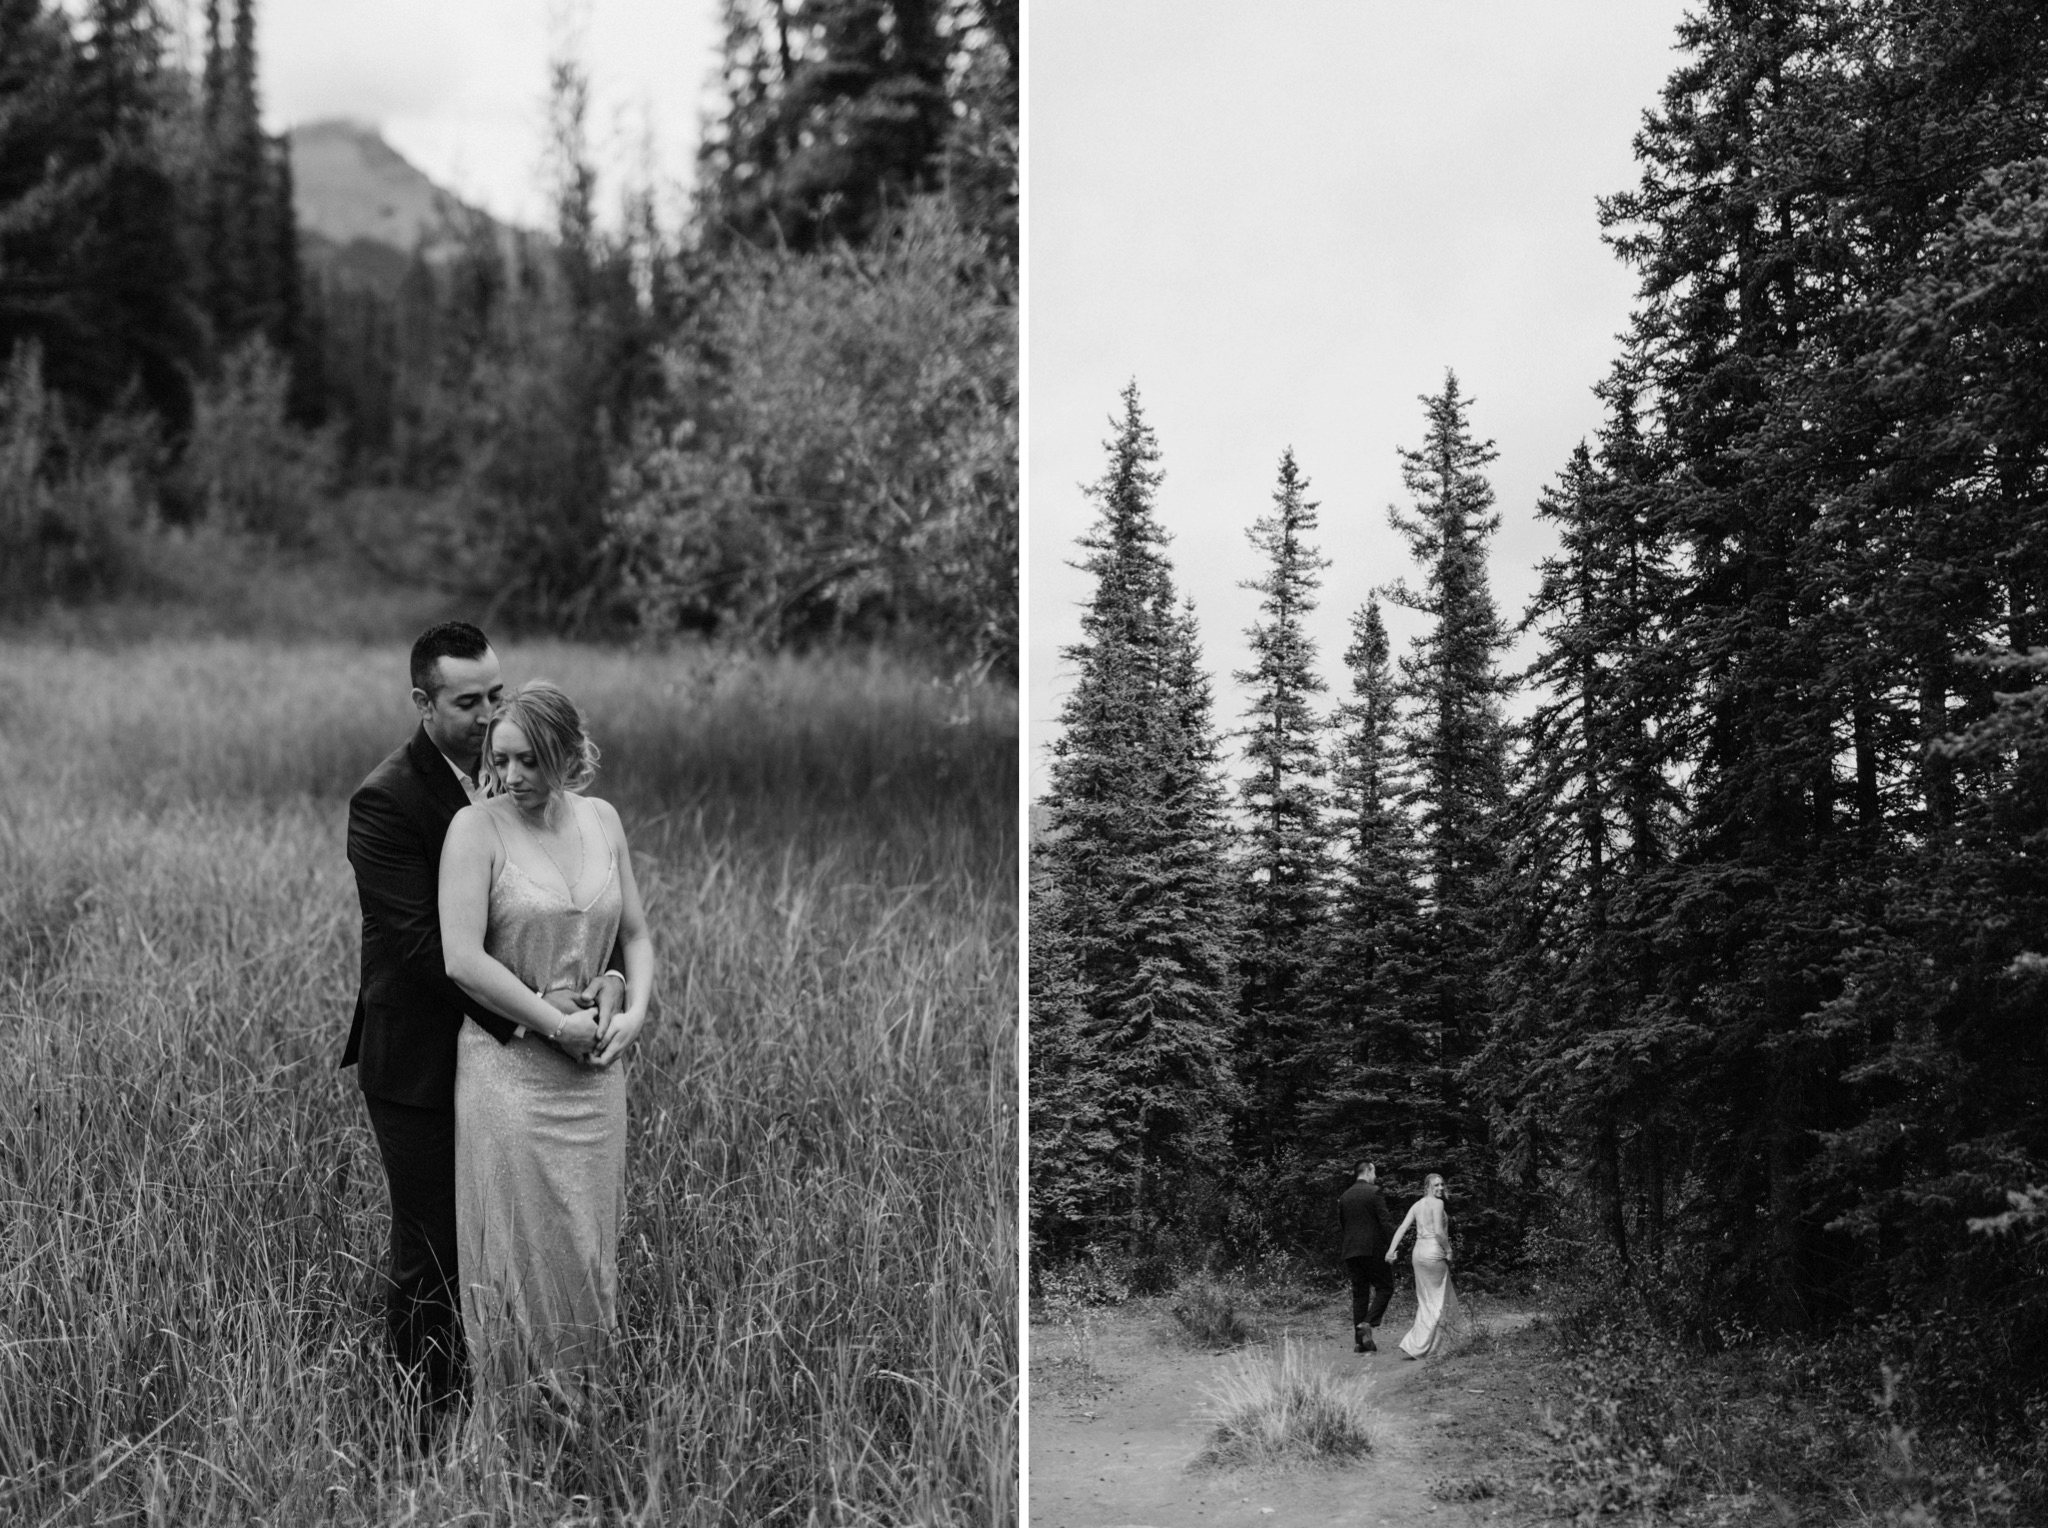 Marshy wedding portrait location in Canmore